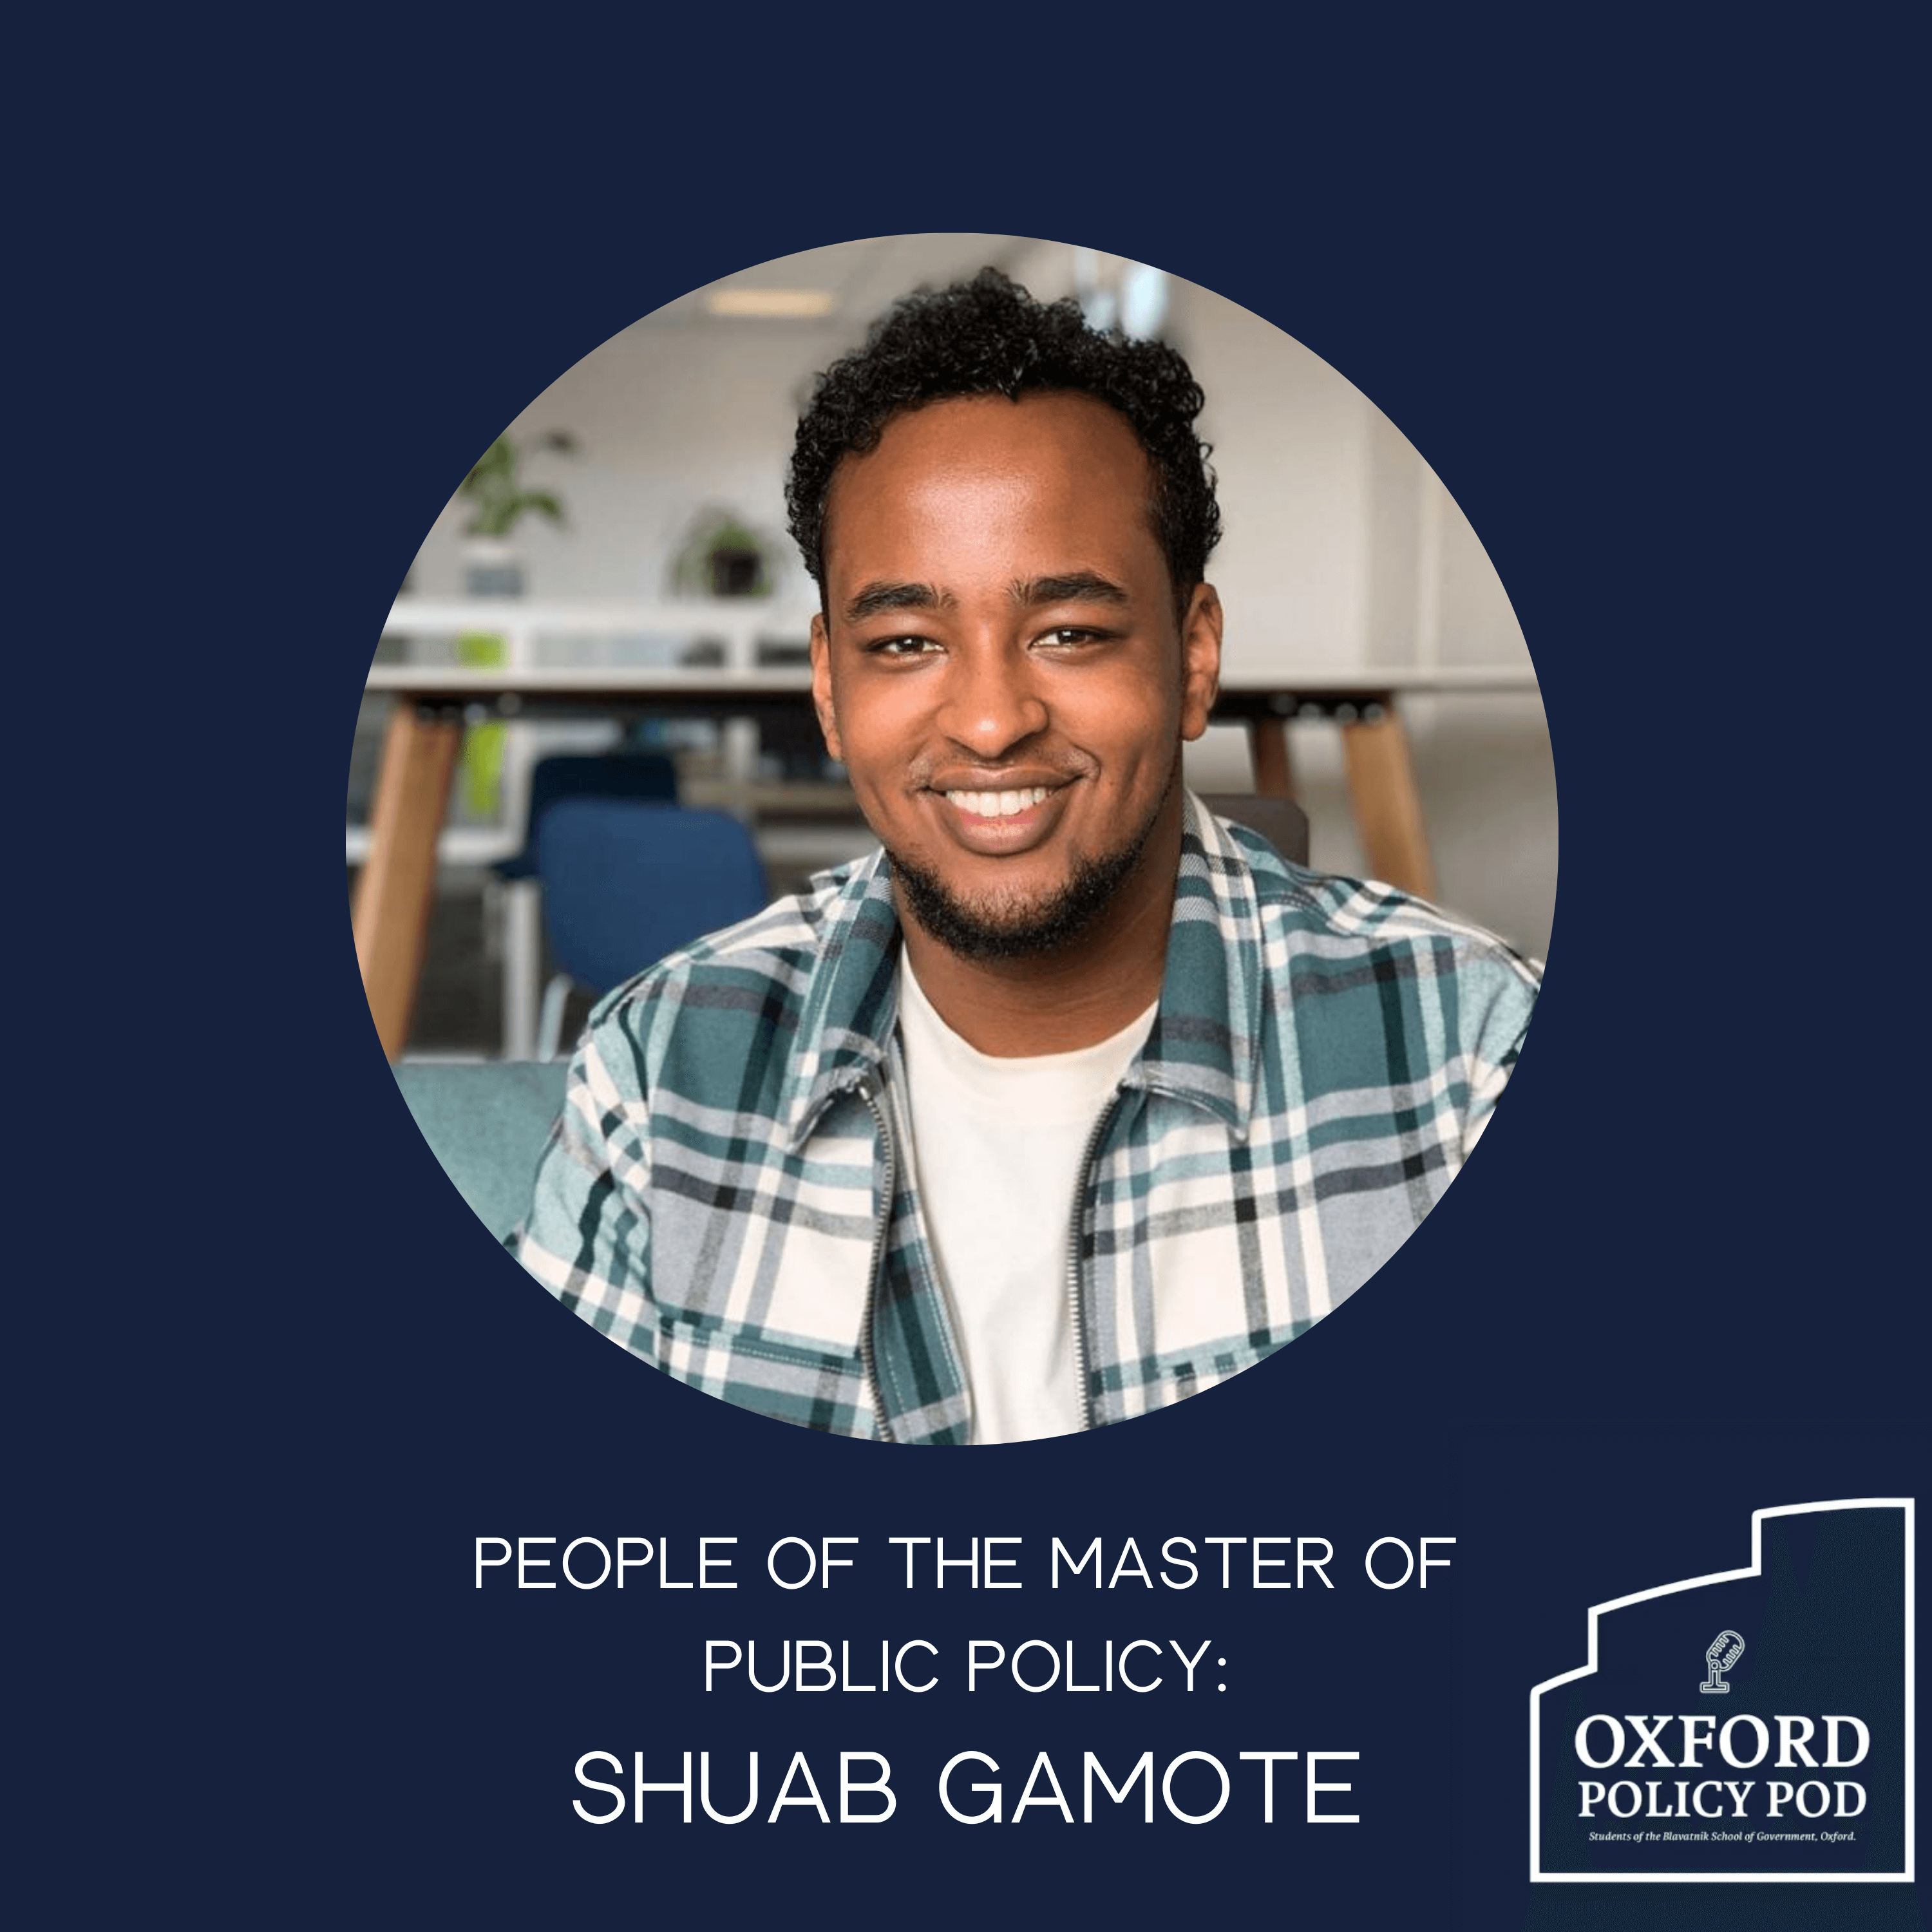 Shuab Gamote: An Unconventional Educational Journey